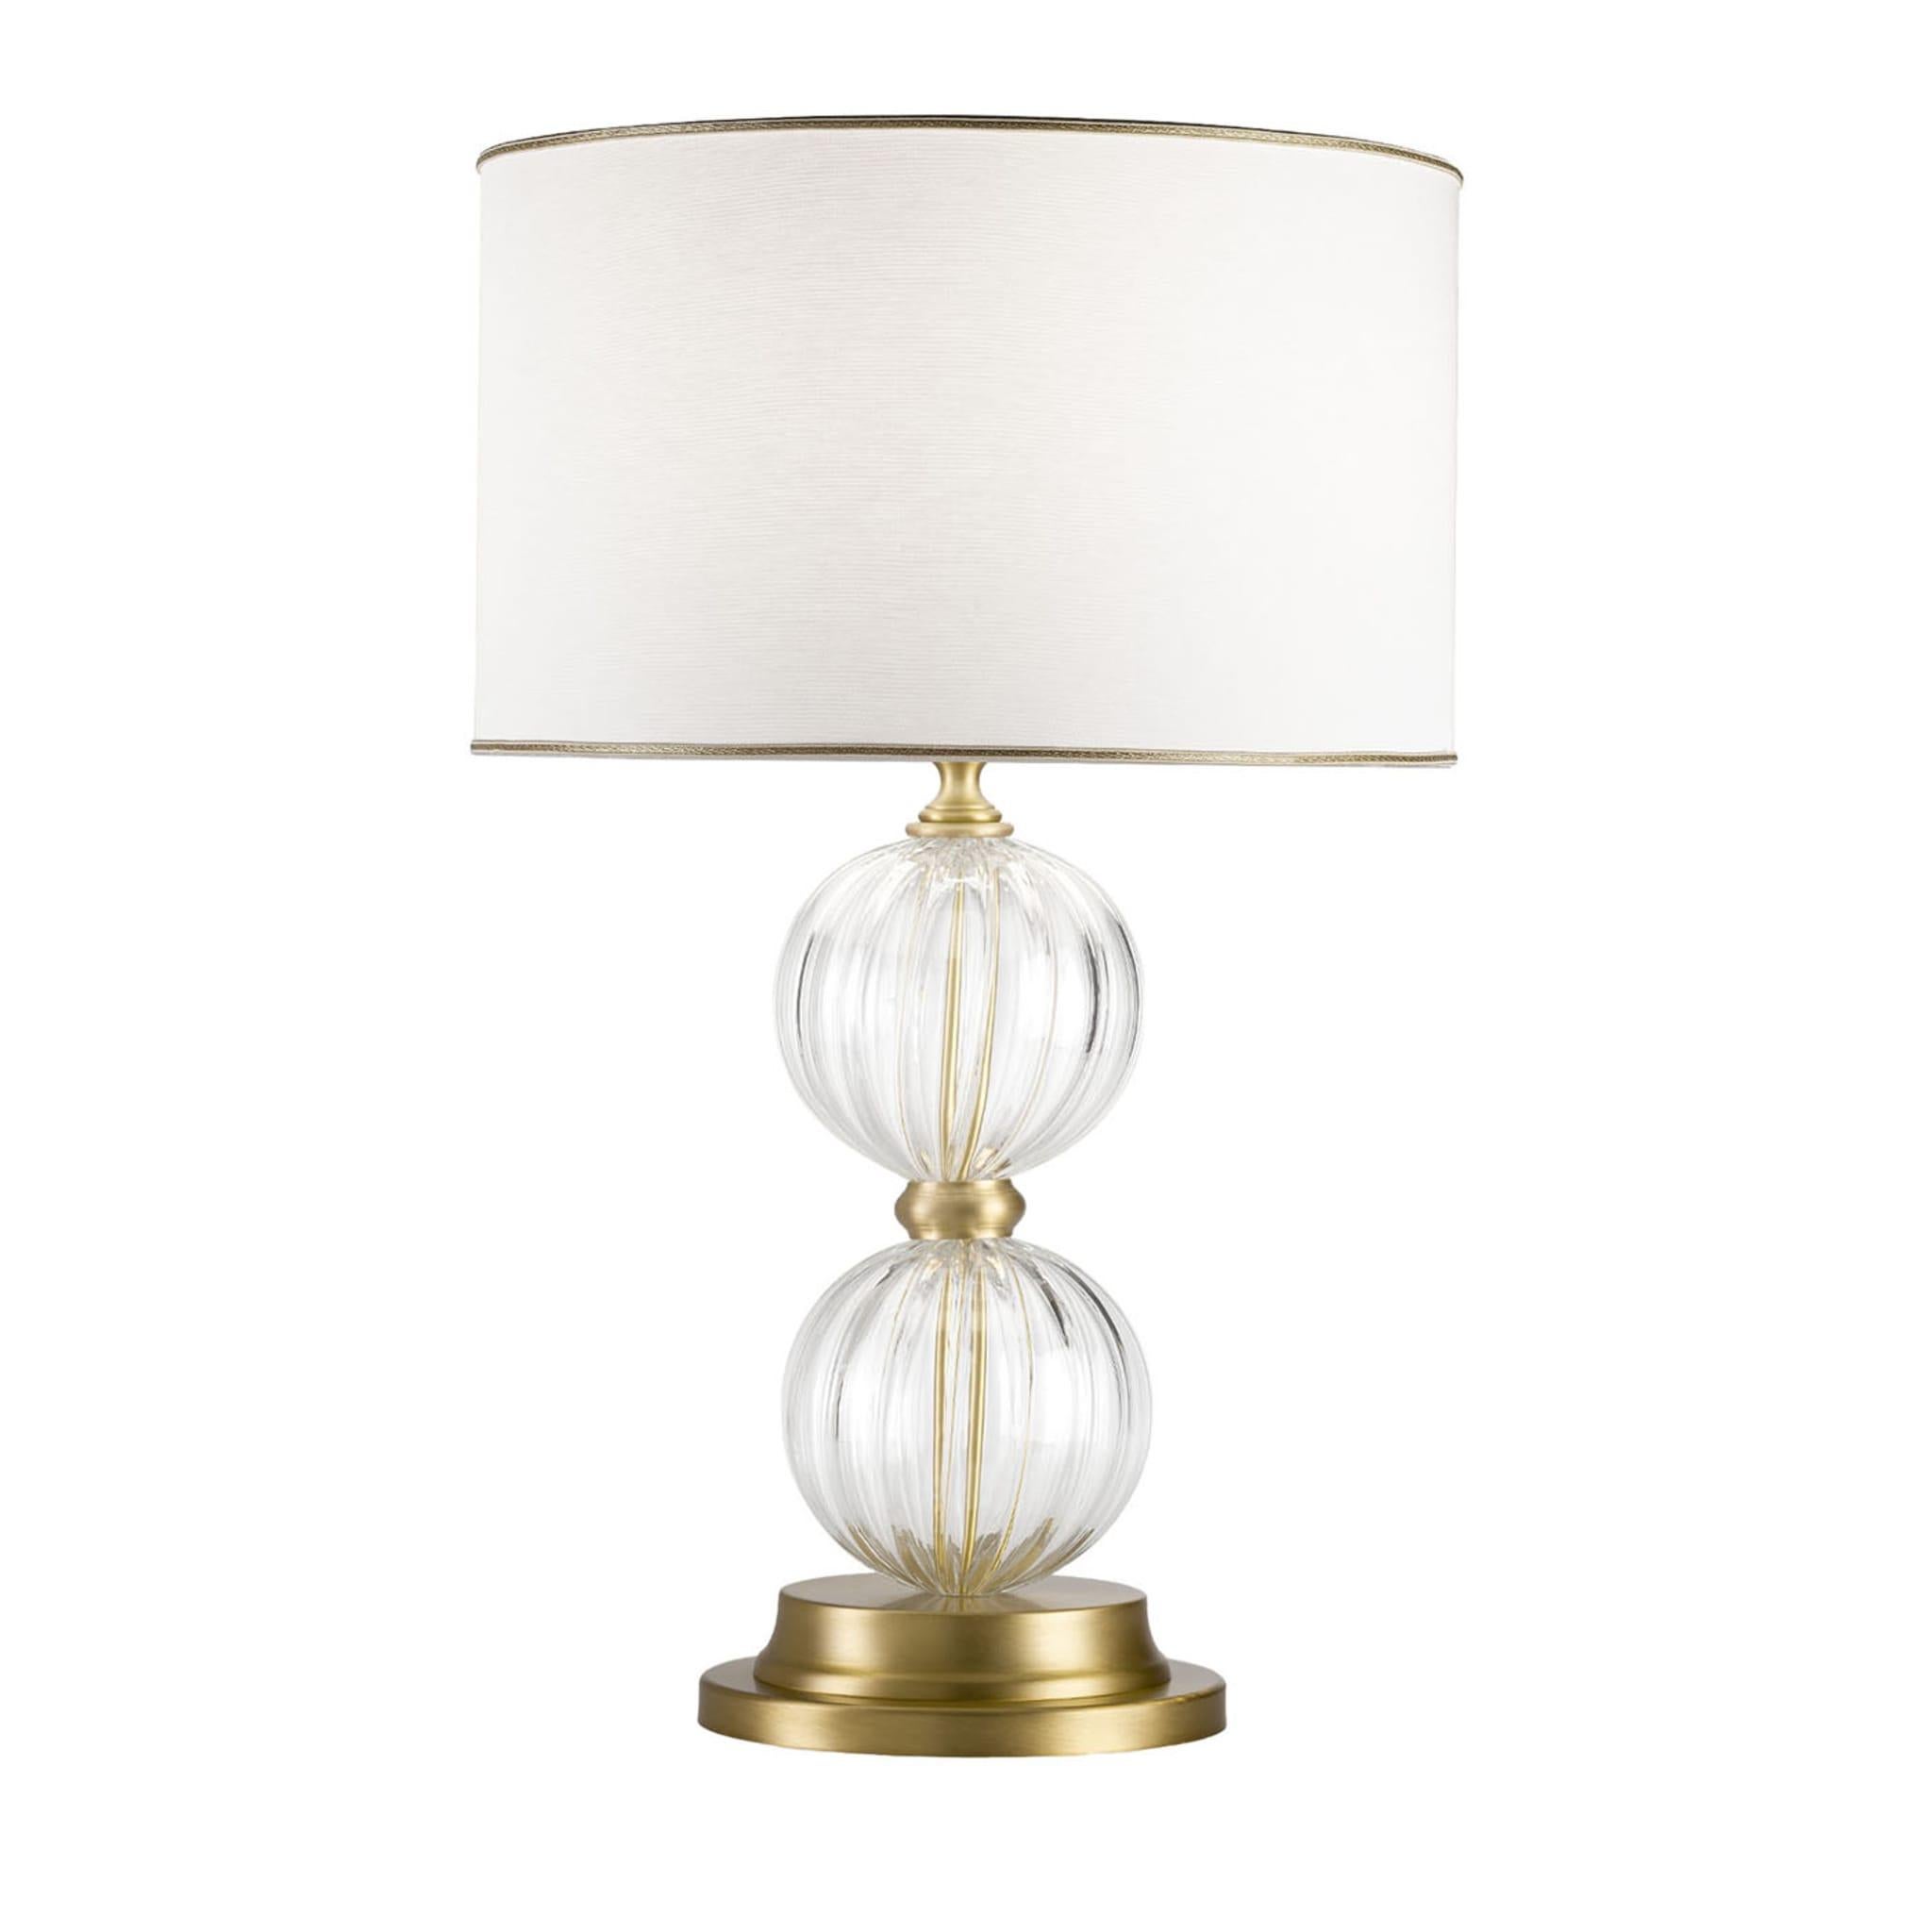 A plush golden-finished metal frame welcoming two spheres in prized transparent Murano glass defines this superb table lamp. Topped by a drum shade in fine beige silk, the silhouette maximizes its appeal thanks to the spheres' scalloped texture